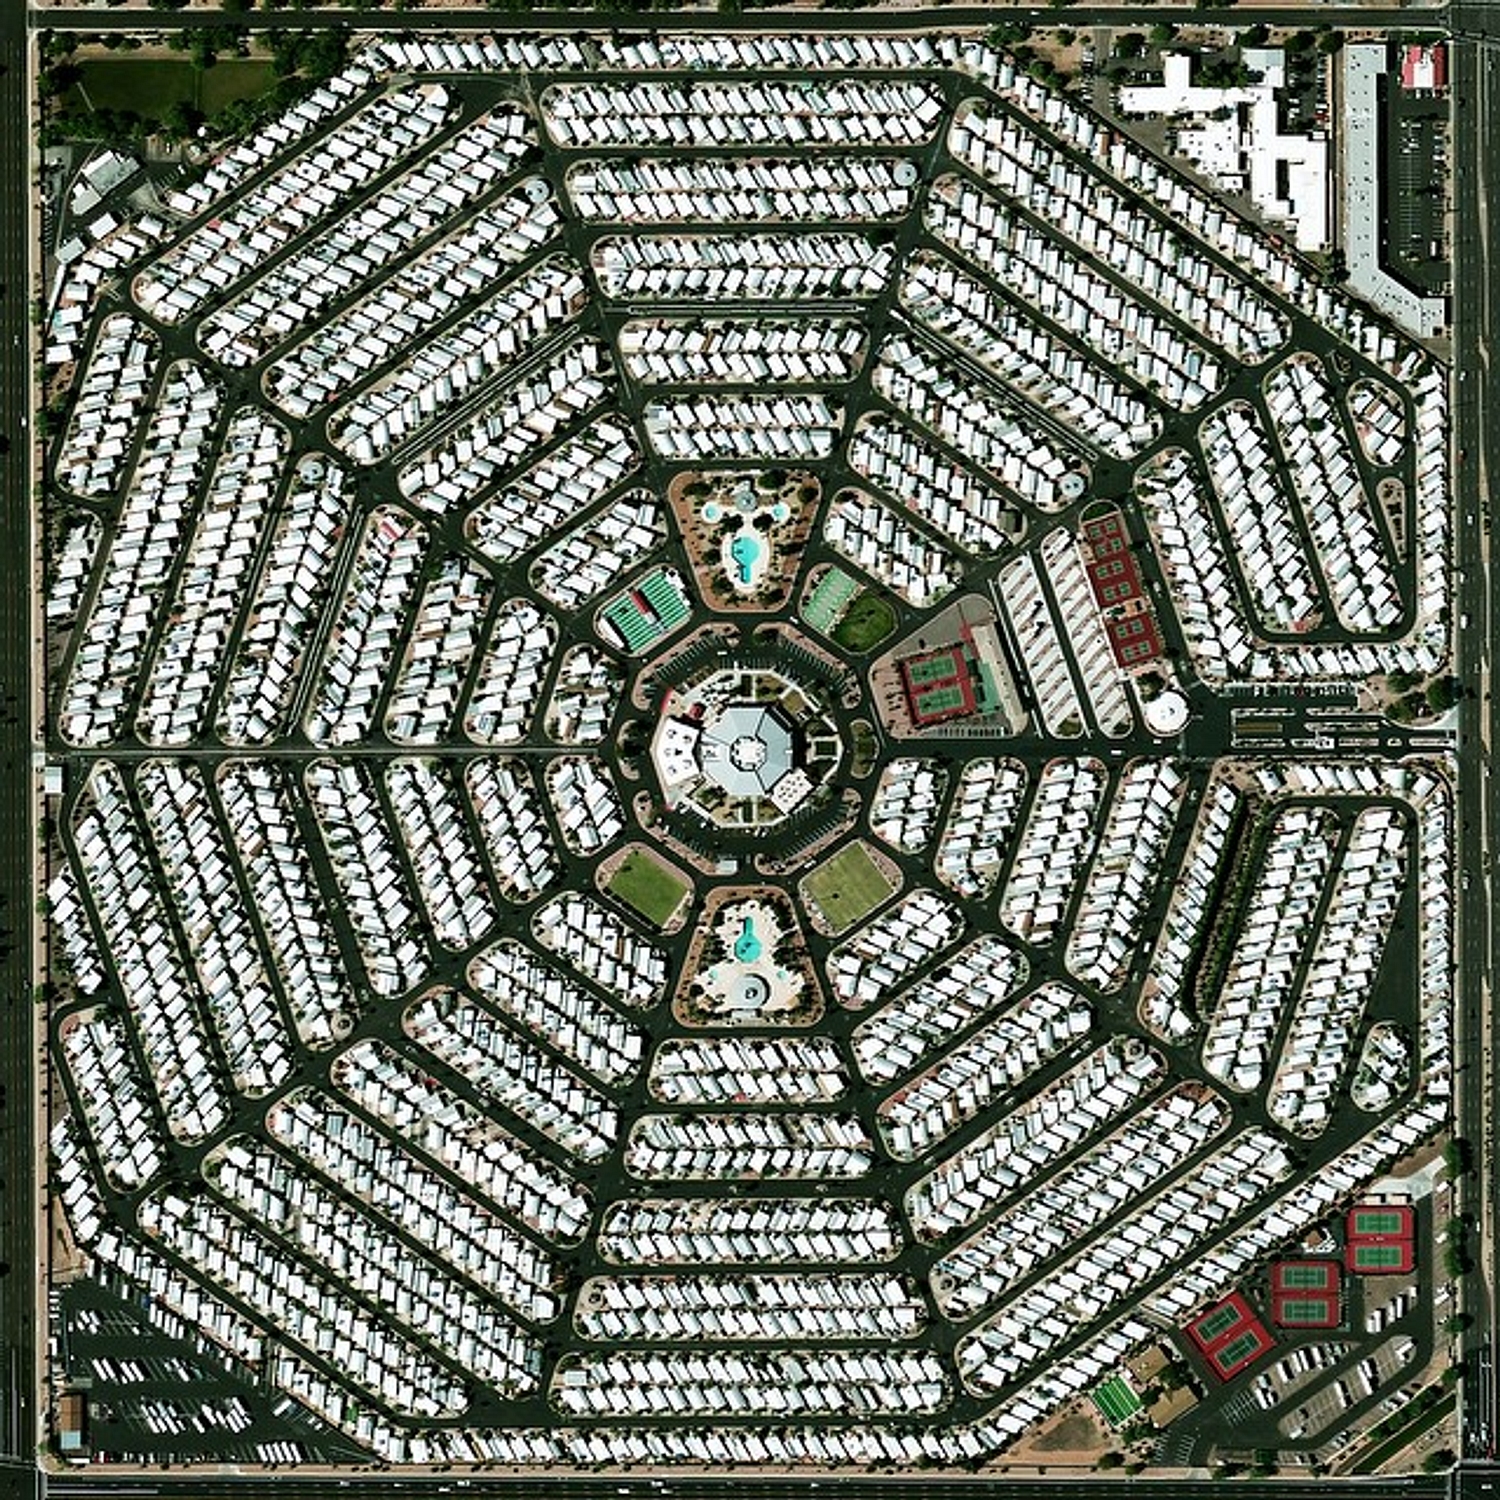 Modest Mouse confirm ‘Strangers to Ourselves’ art, release details